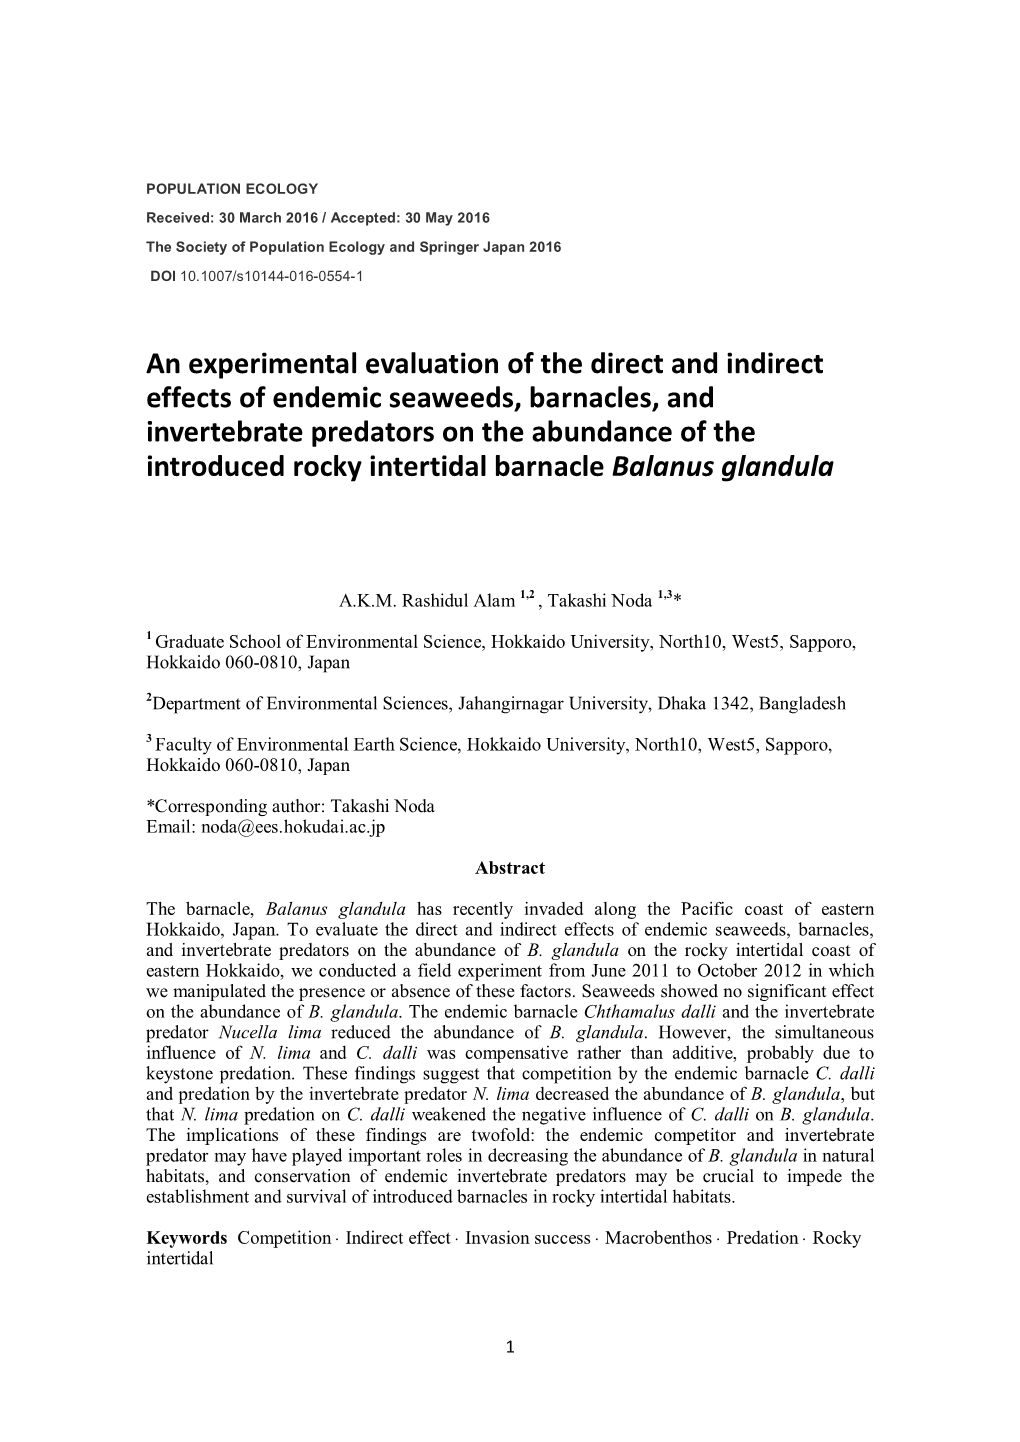 An Experimental Evaluation of the Direct and Indirect